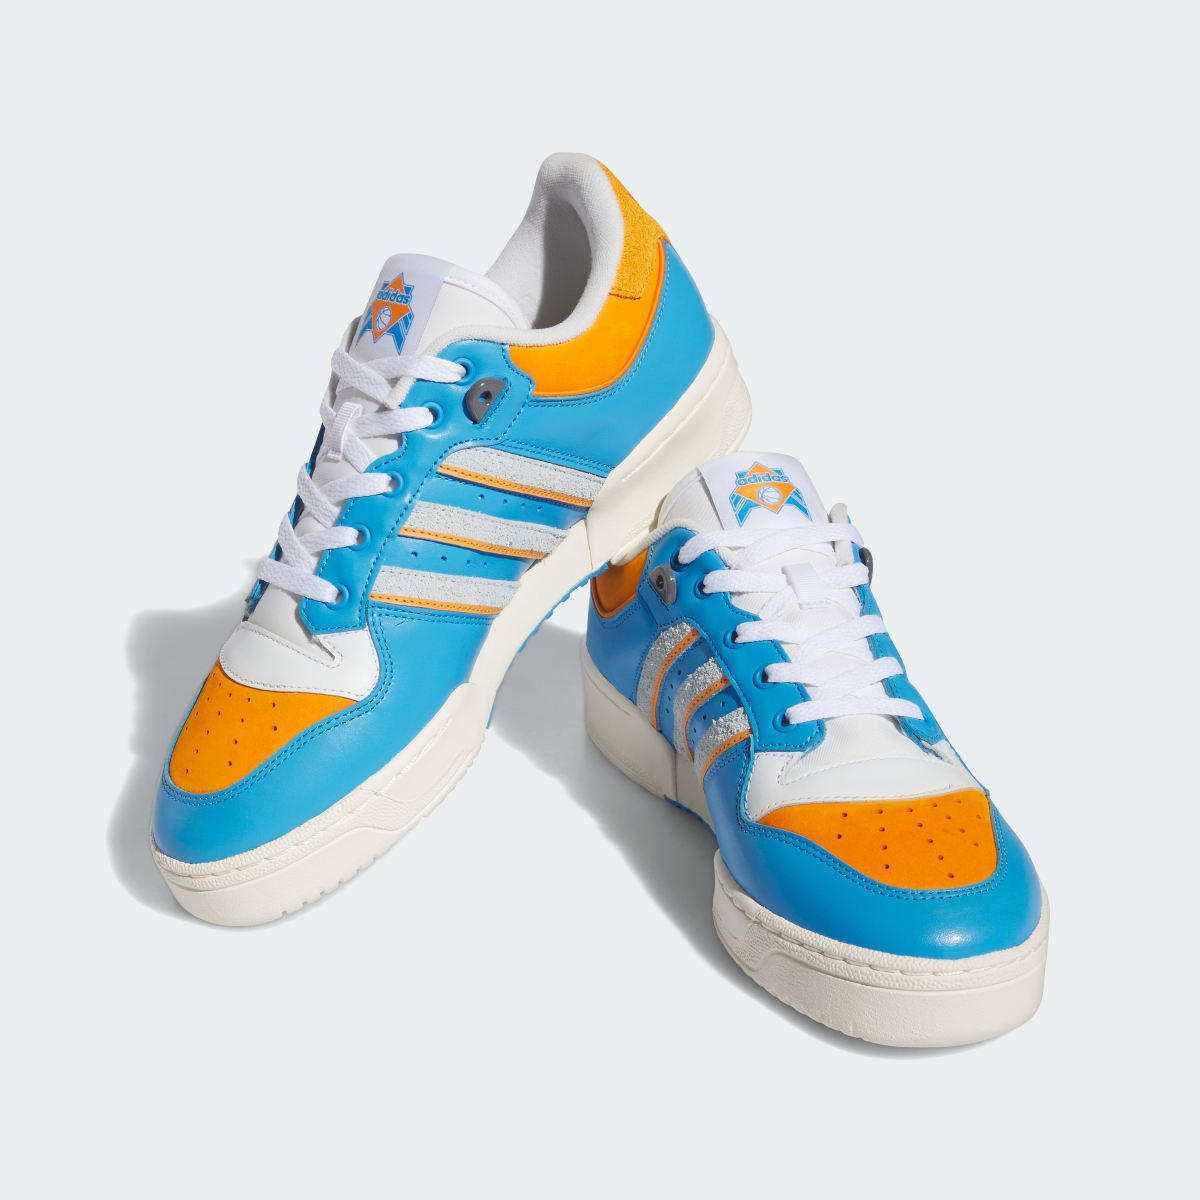 Adidas Sapatilhas adidas Rivalry Low Itchy. 7